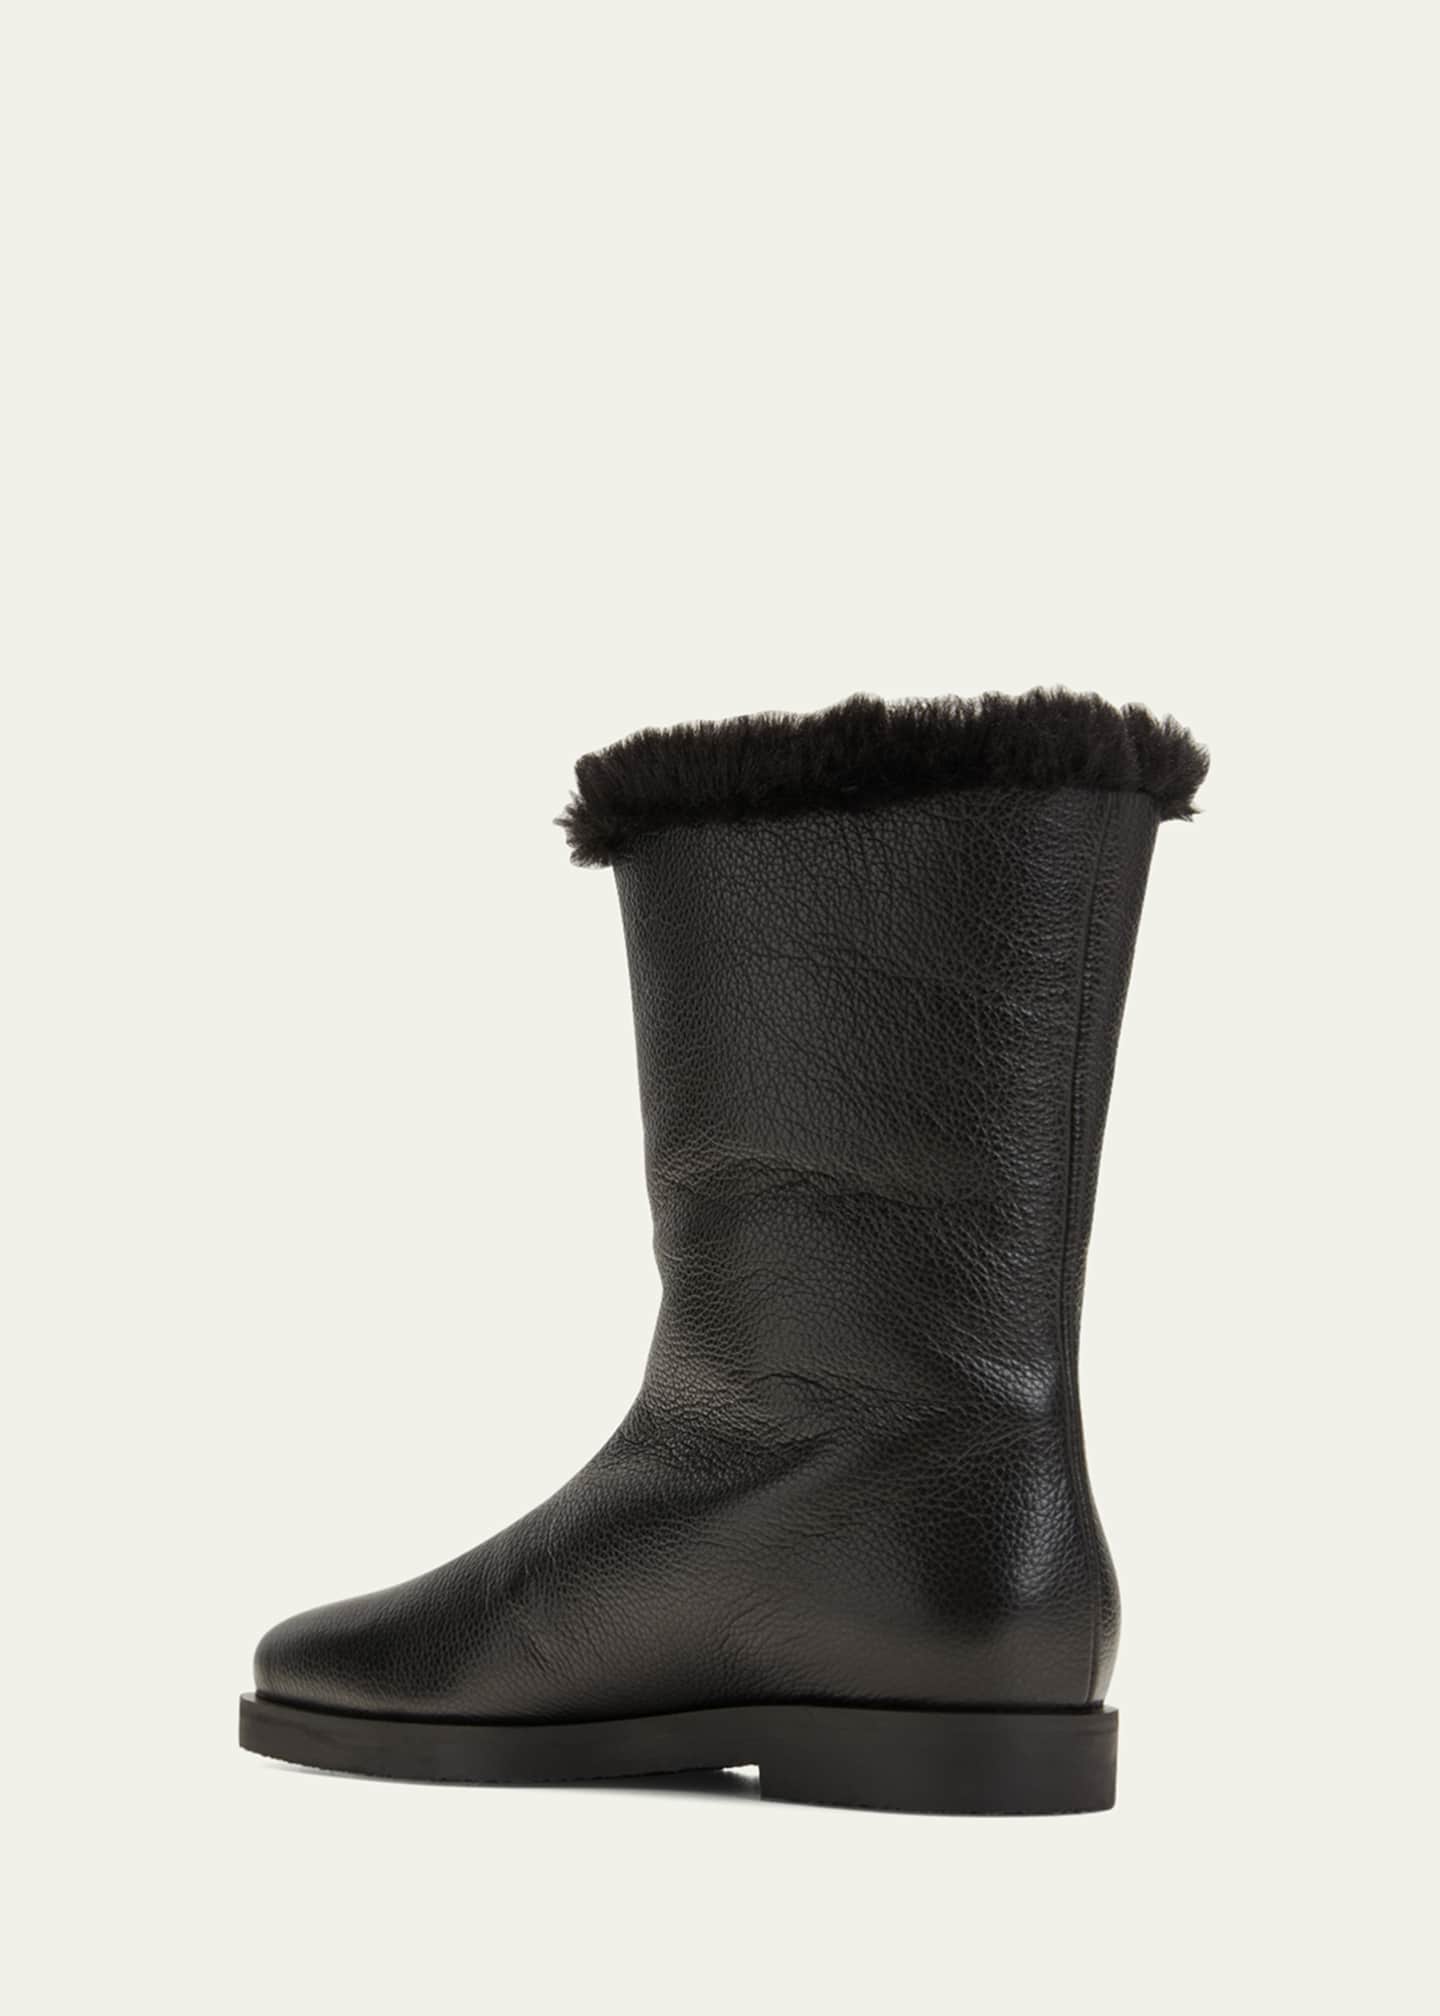 Toteme Off-Duty Faux Fur Ankle Boots - Bergdorf Goodman